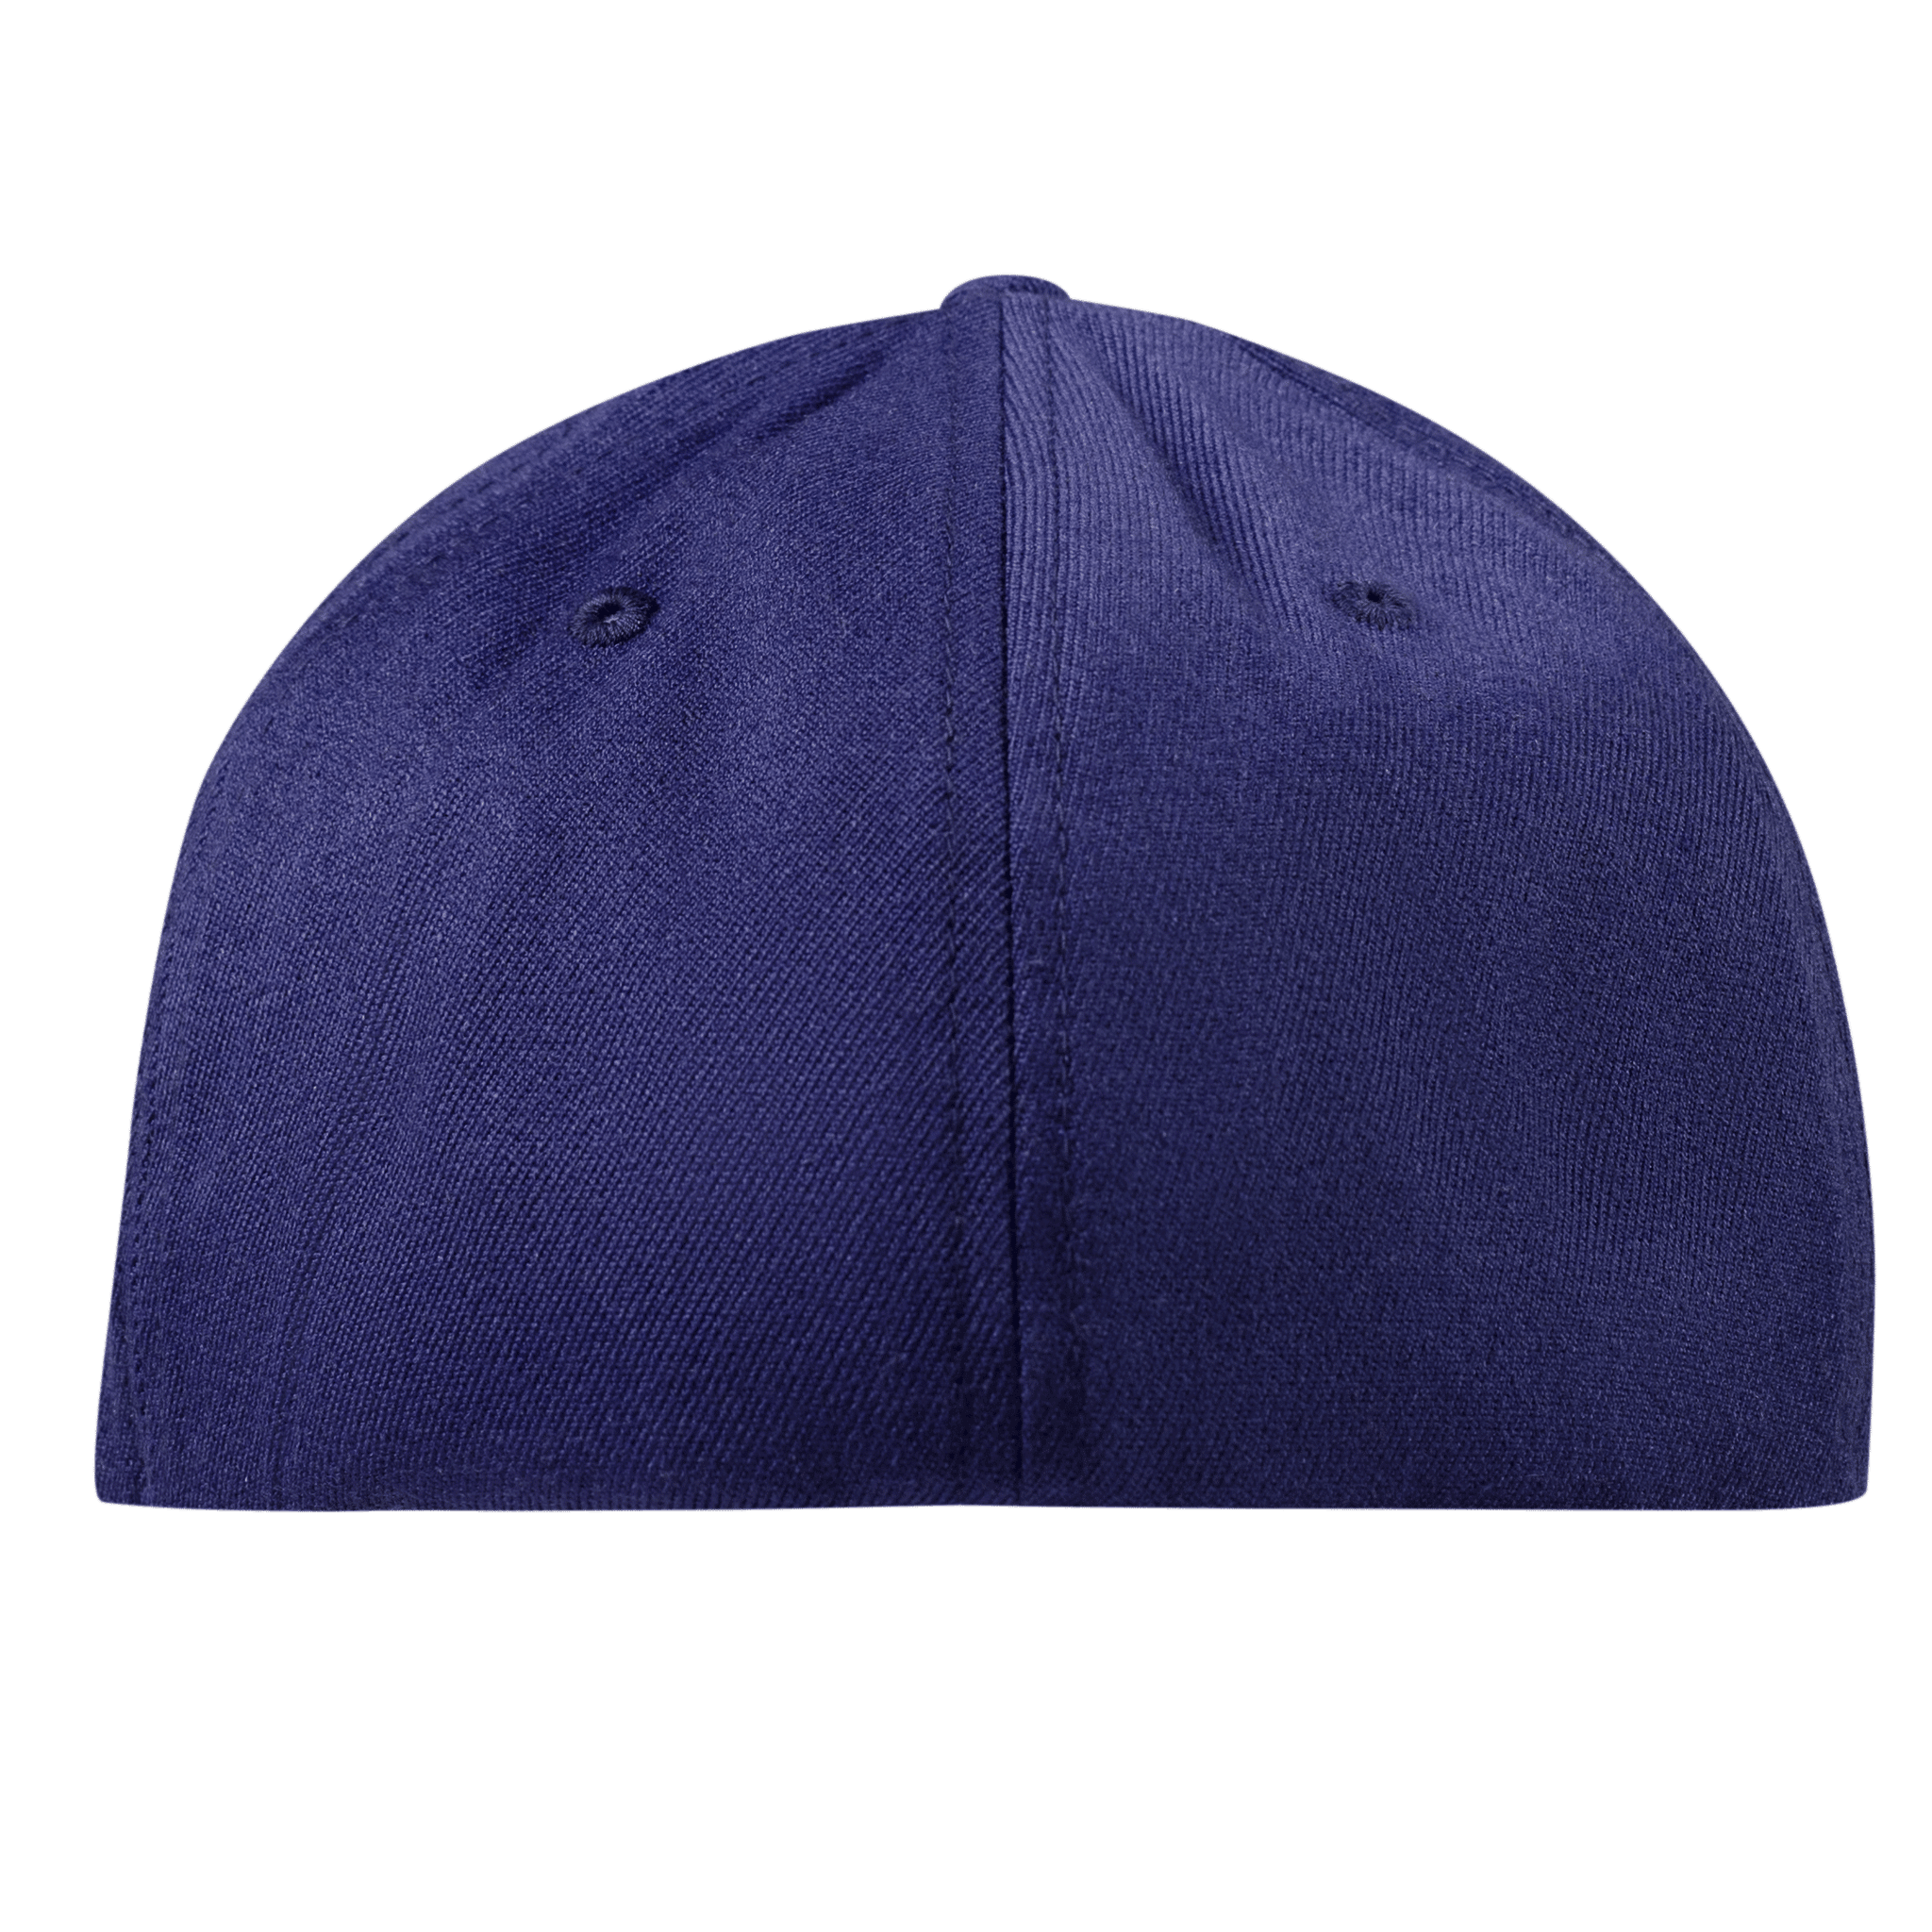 Colorado 38 Midnight Flexfit Fitted Back Navy